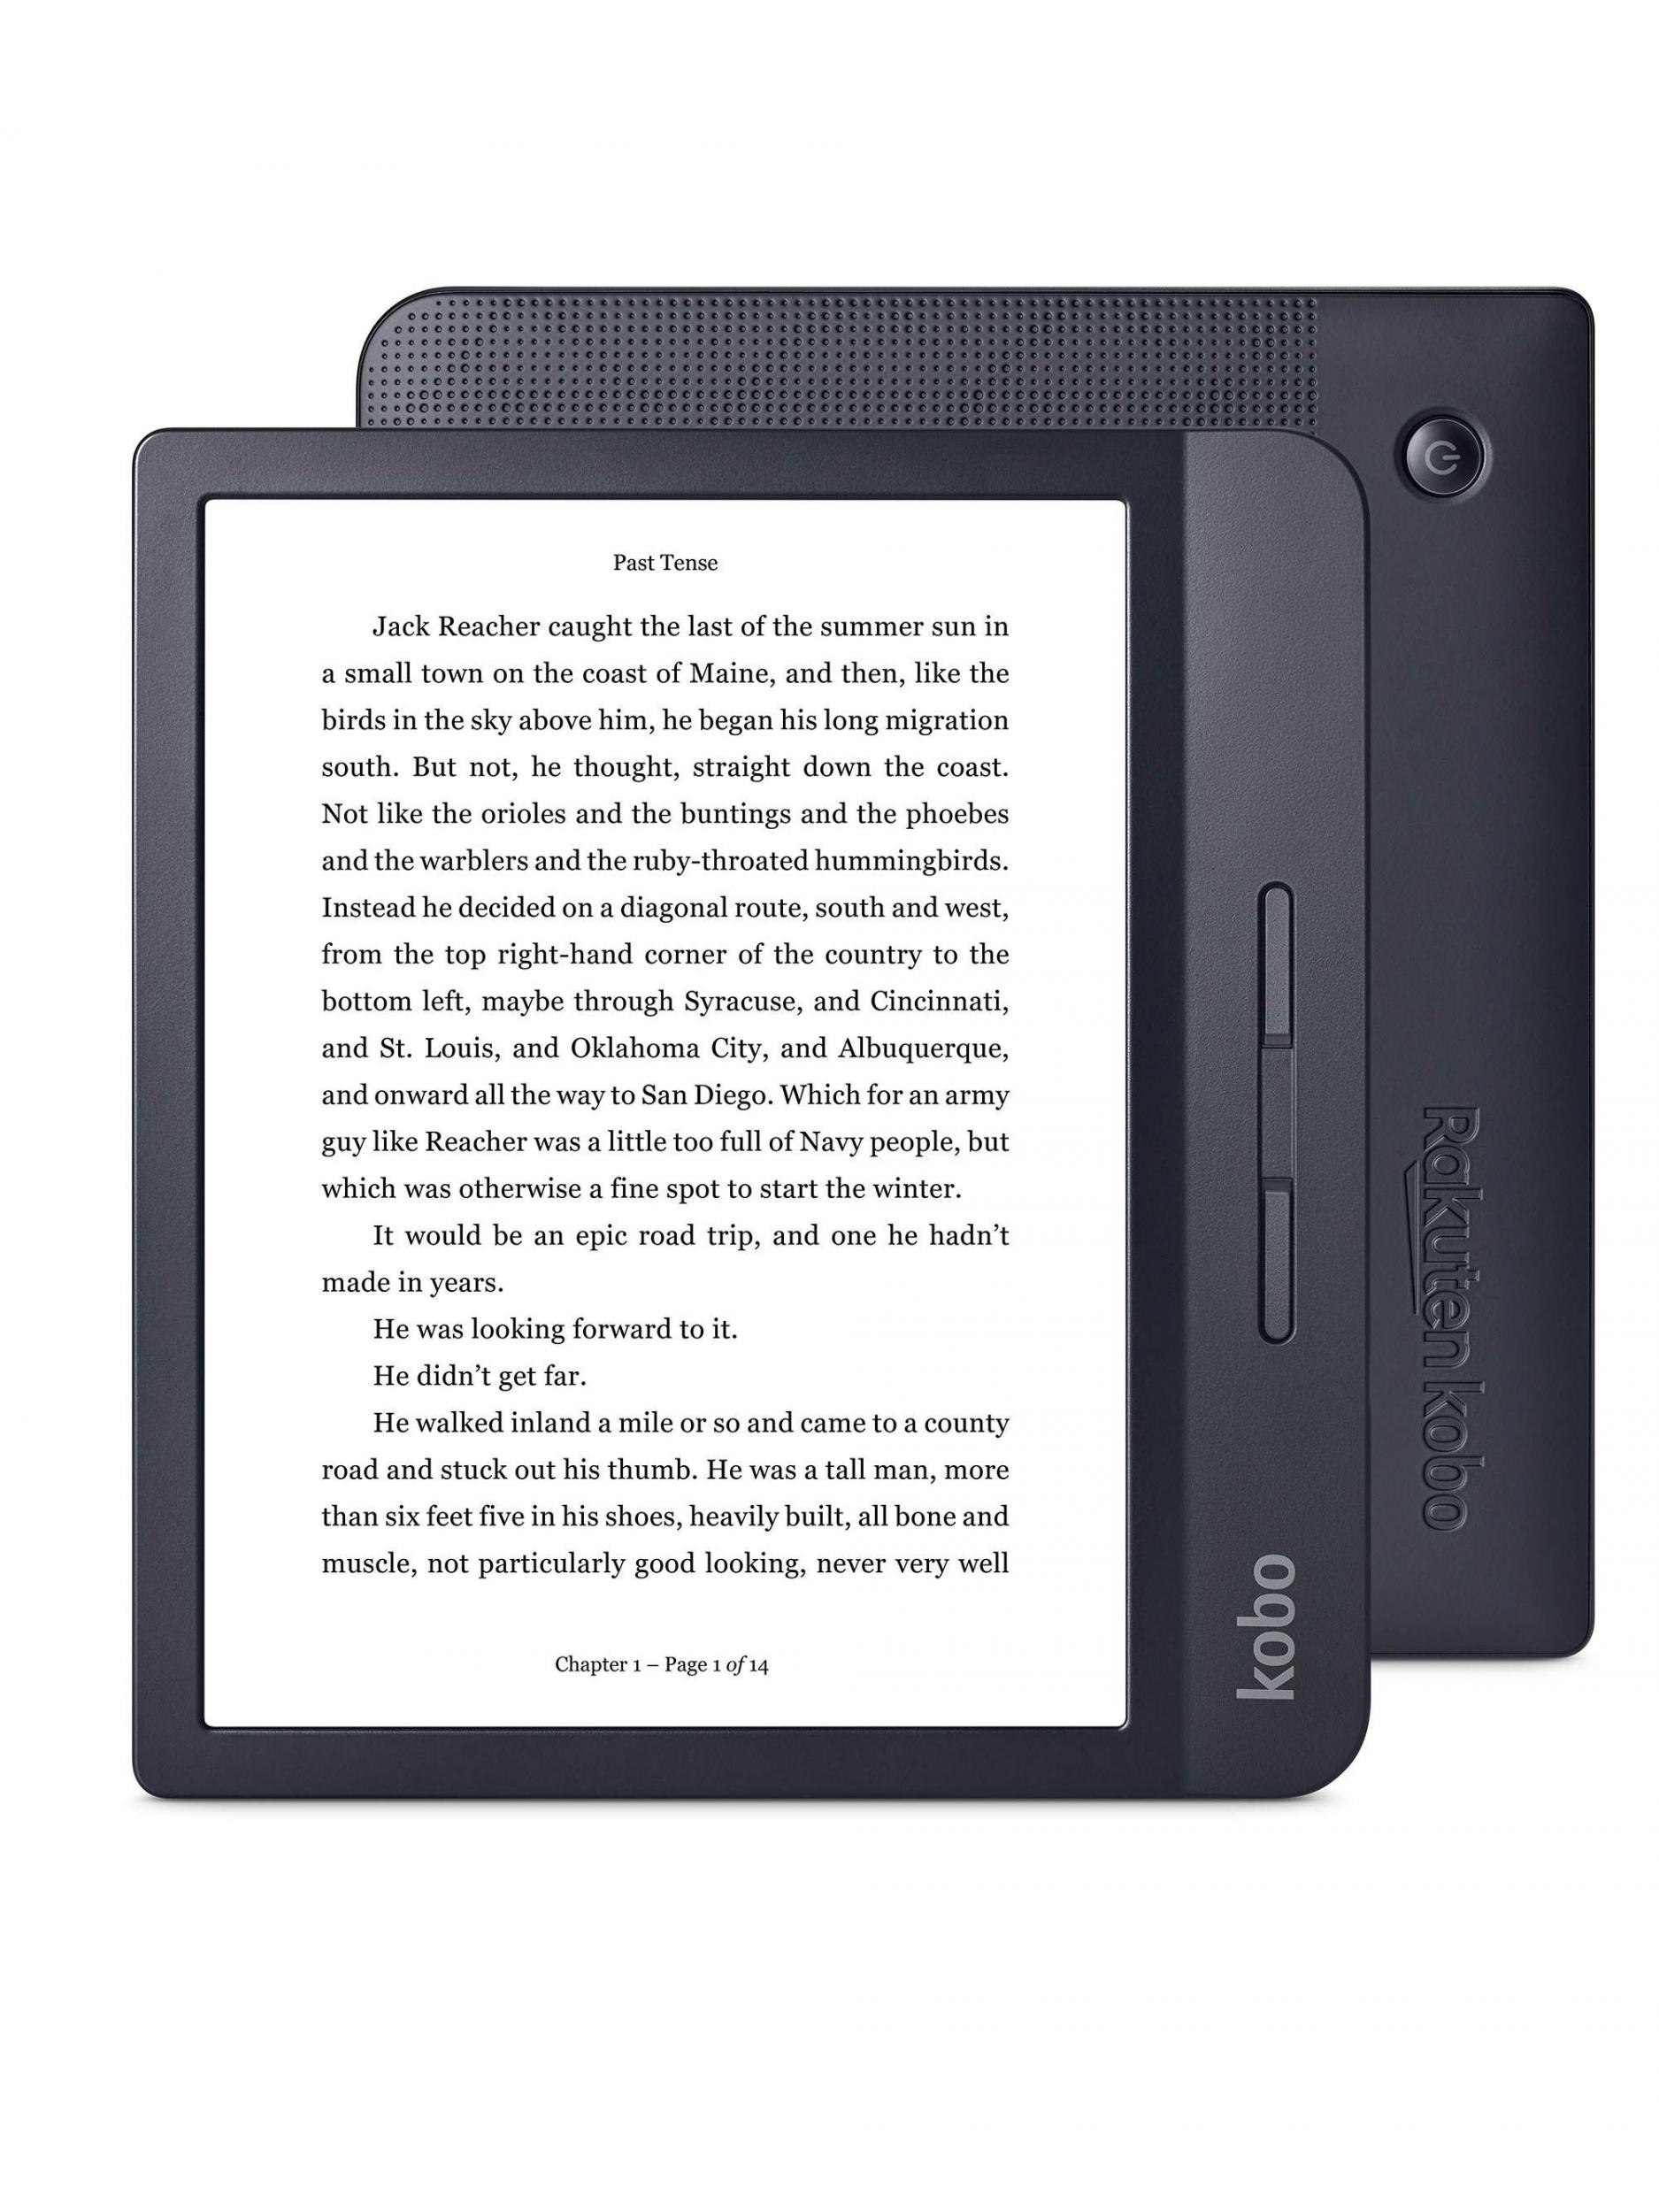 How to Use an Amazon Fire Tablet as a Kindle